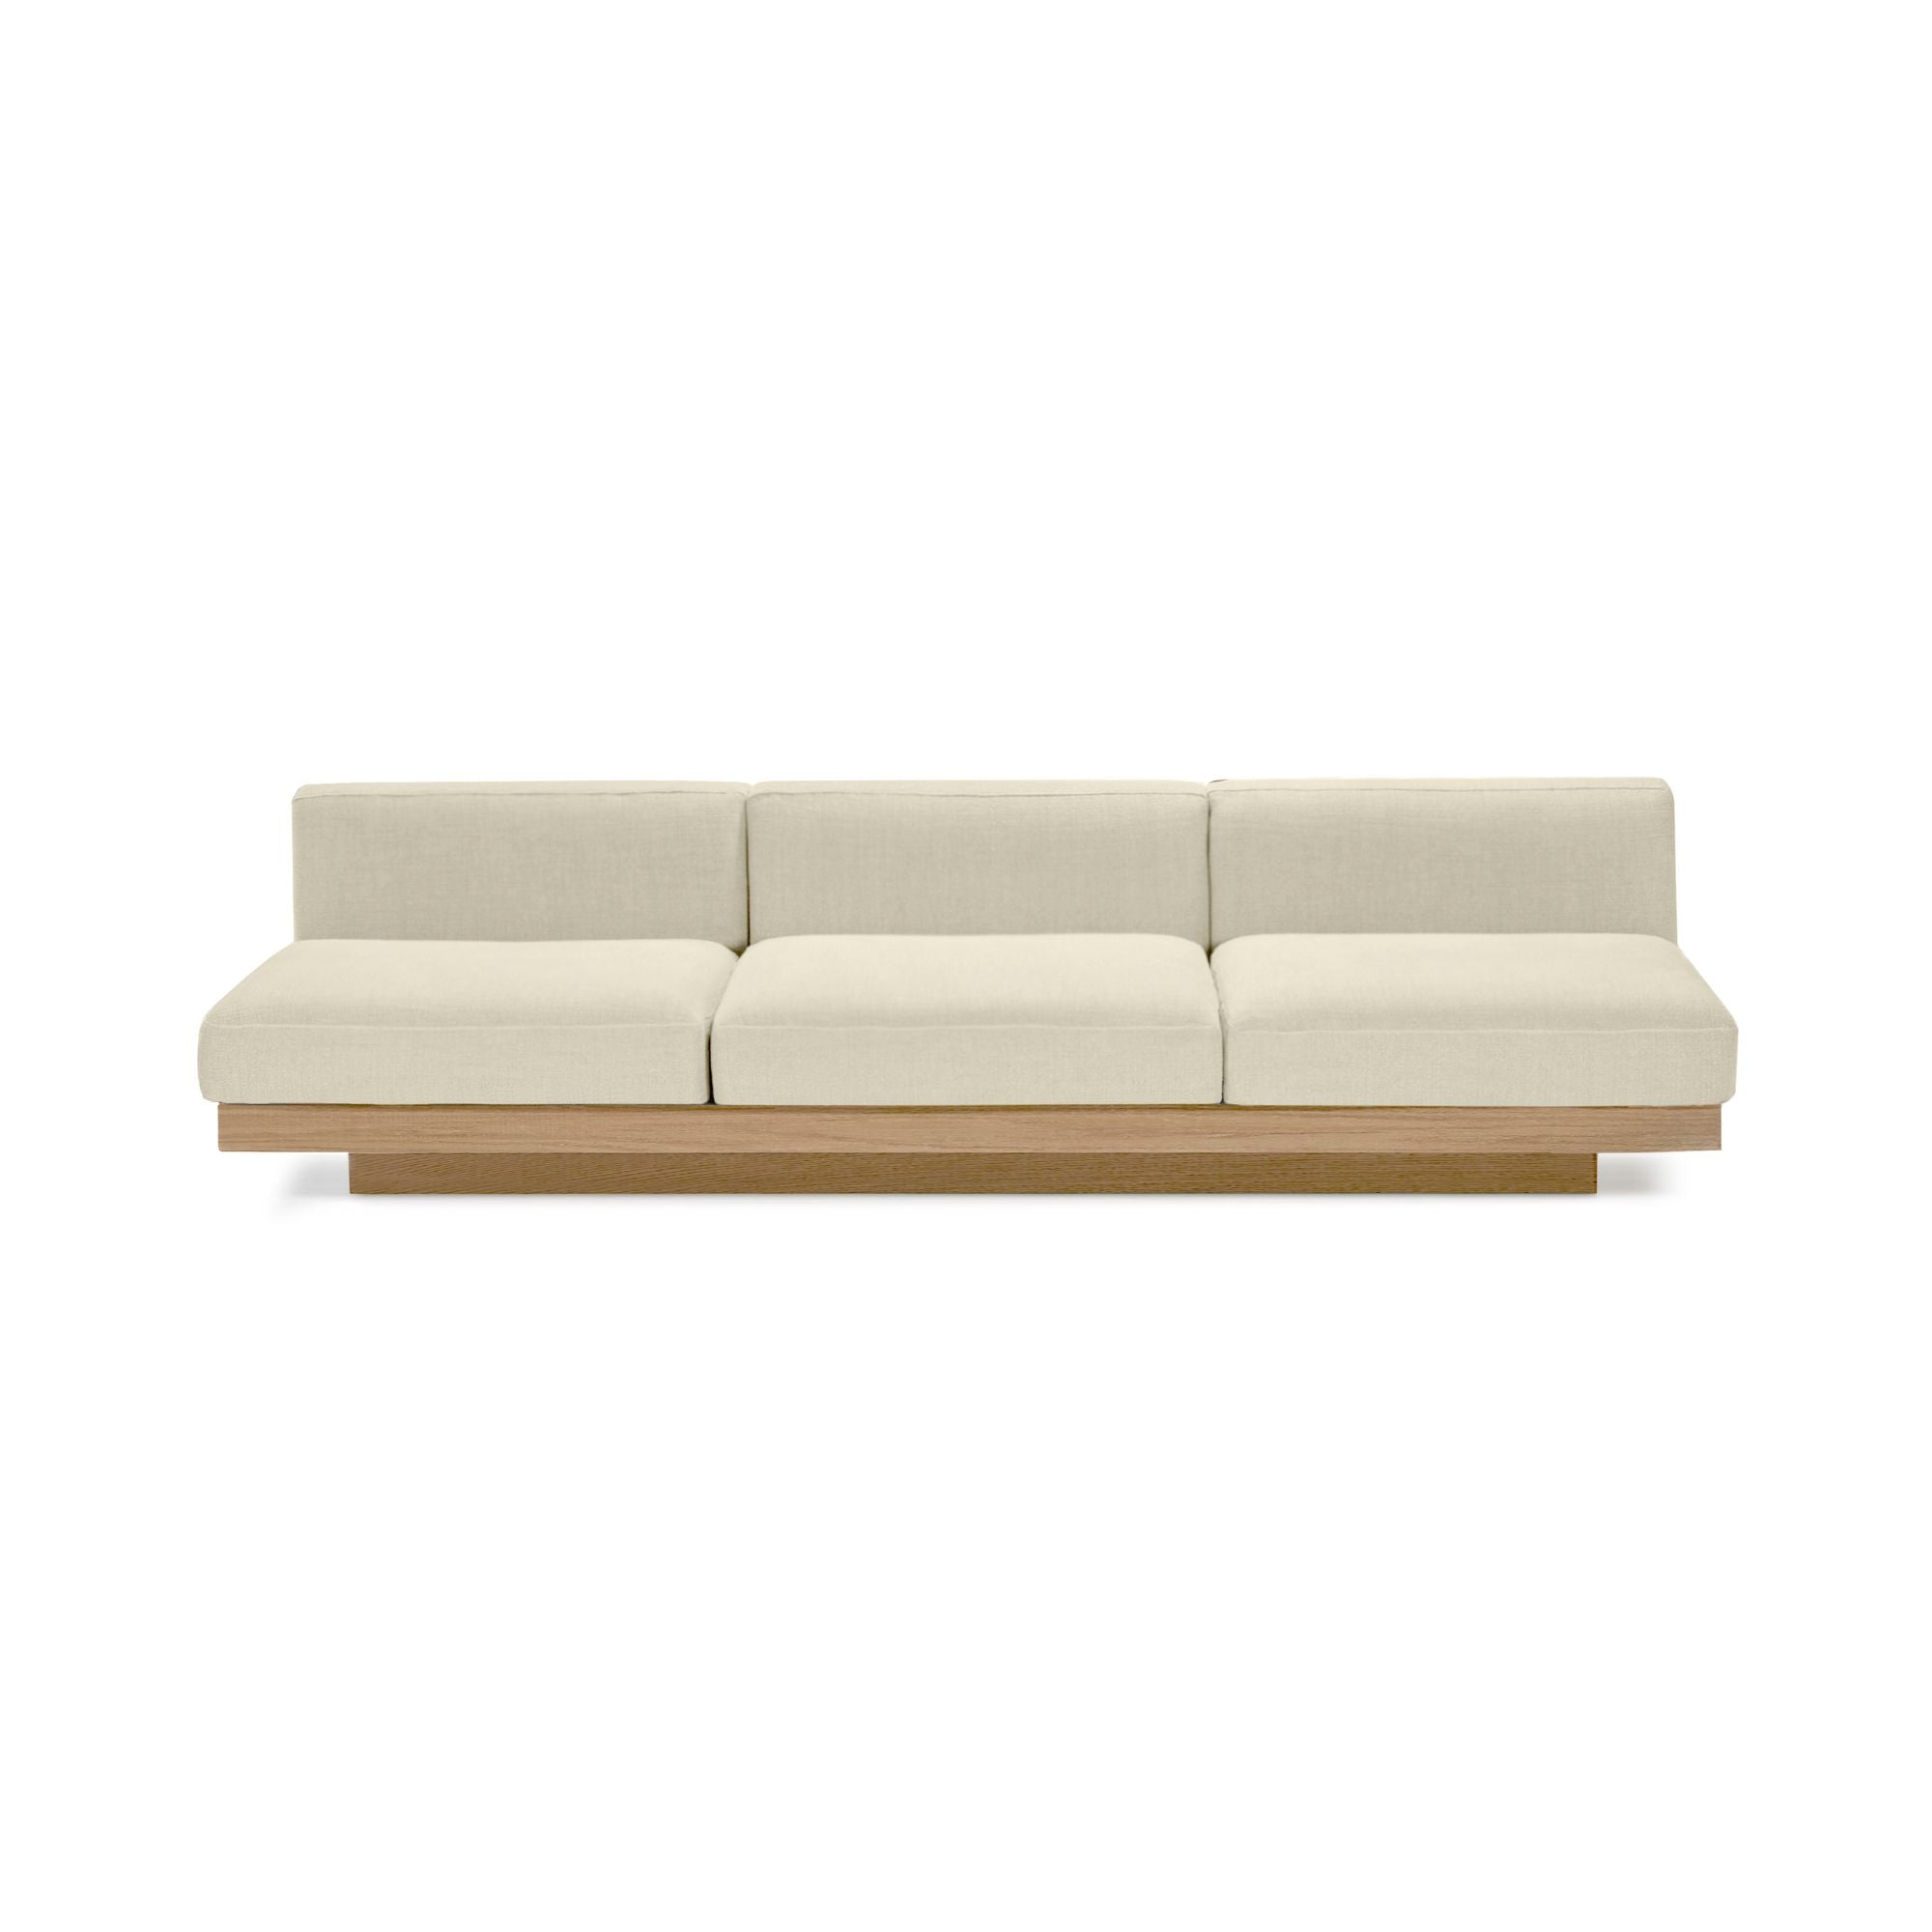 Outdoor Rudolph 3-seater Sofa - THAT COOL LIVING